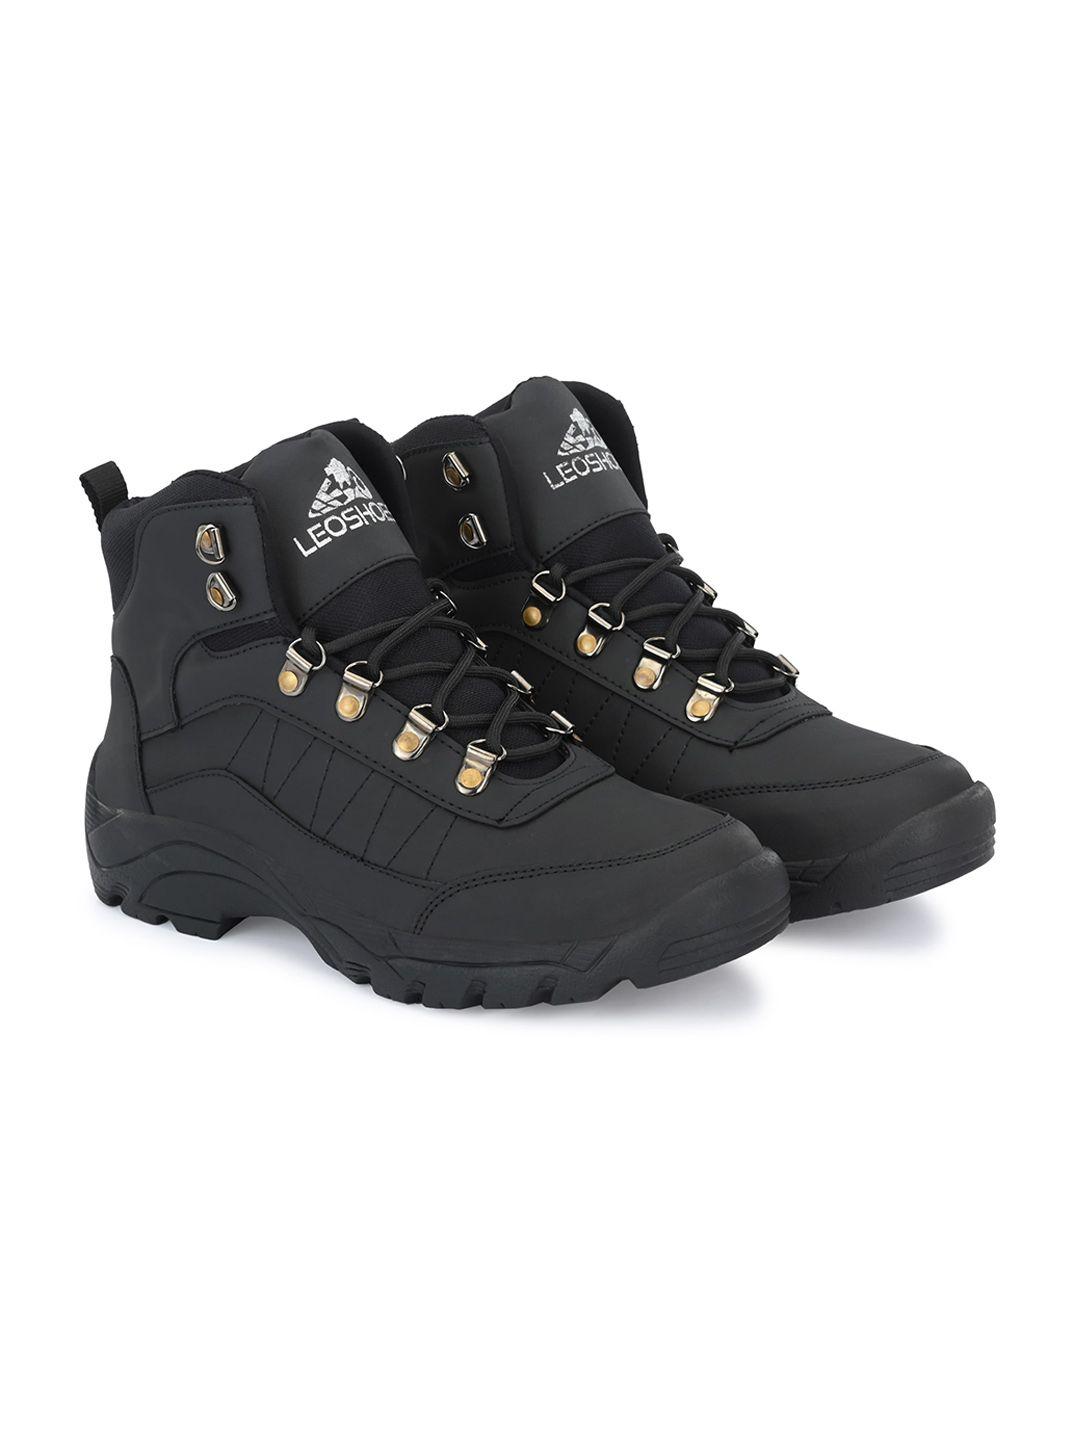 leo's fitness shoes men hiking boots